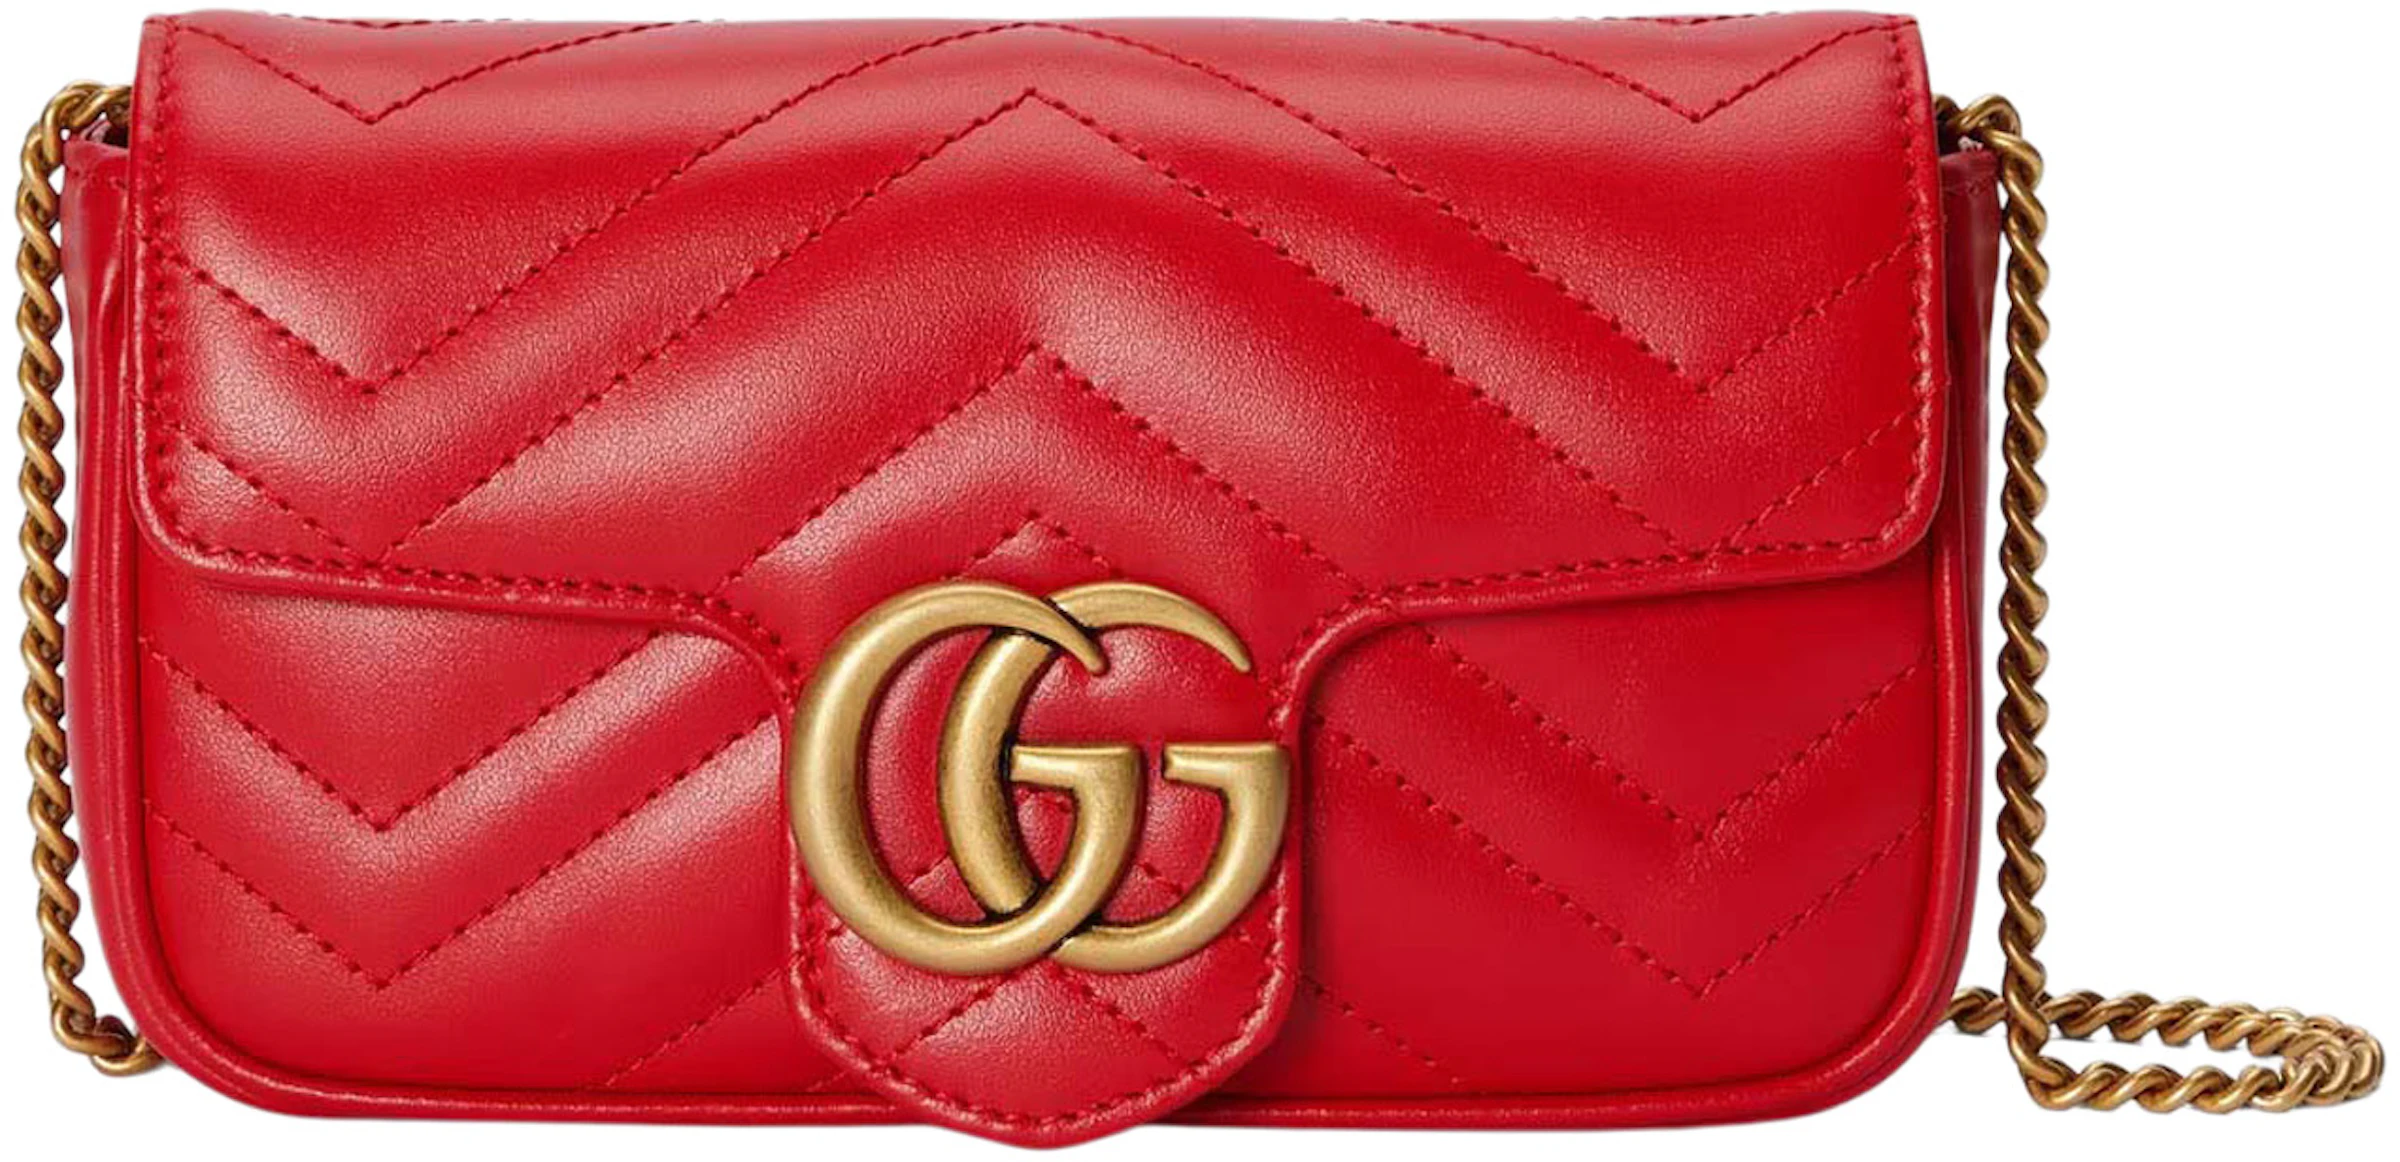 TVstation vold Daddy Gucci GG Marmont Matelasse Super Mini Bag Red in Leather with Antique  Gold-tone - JP